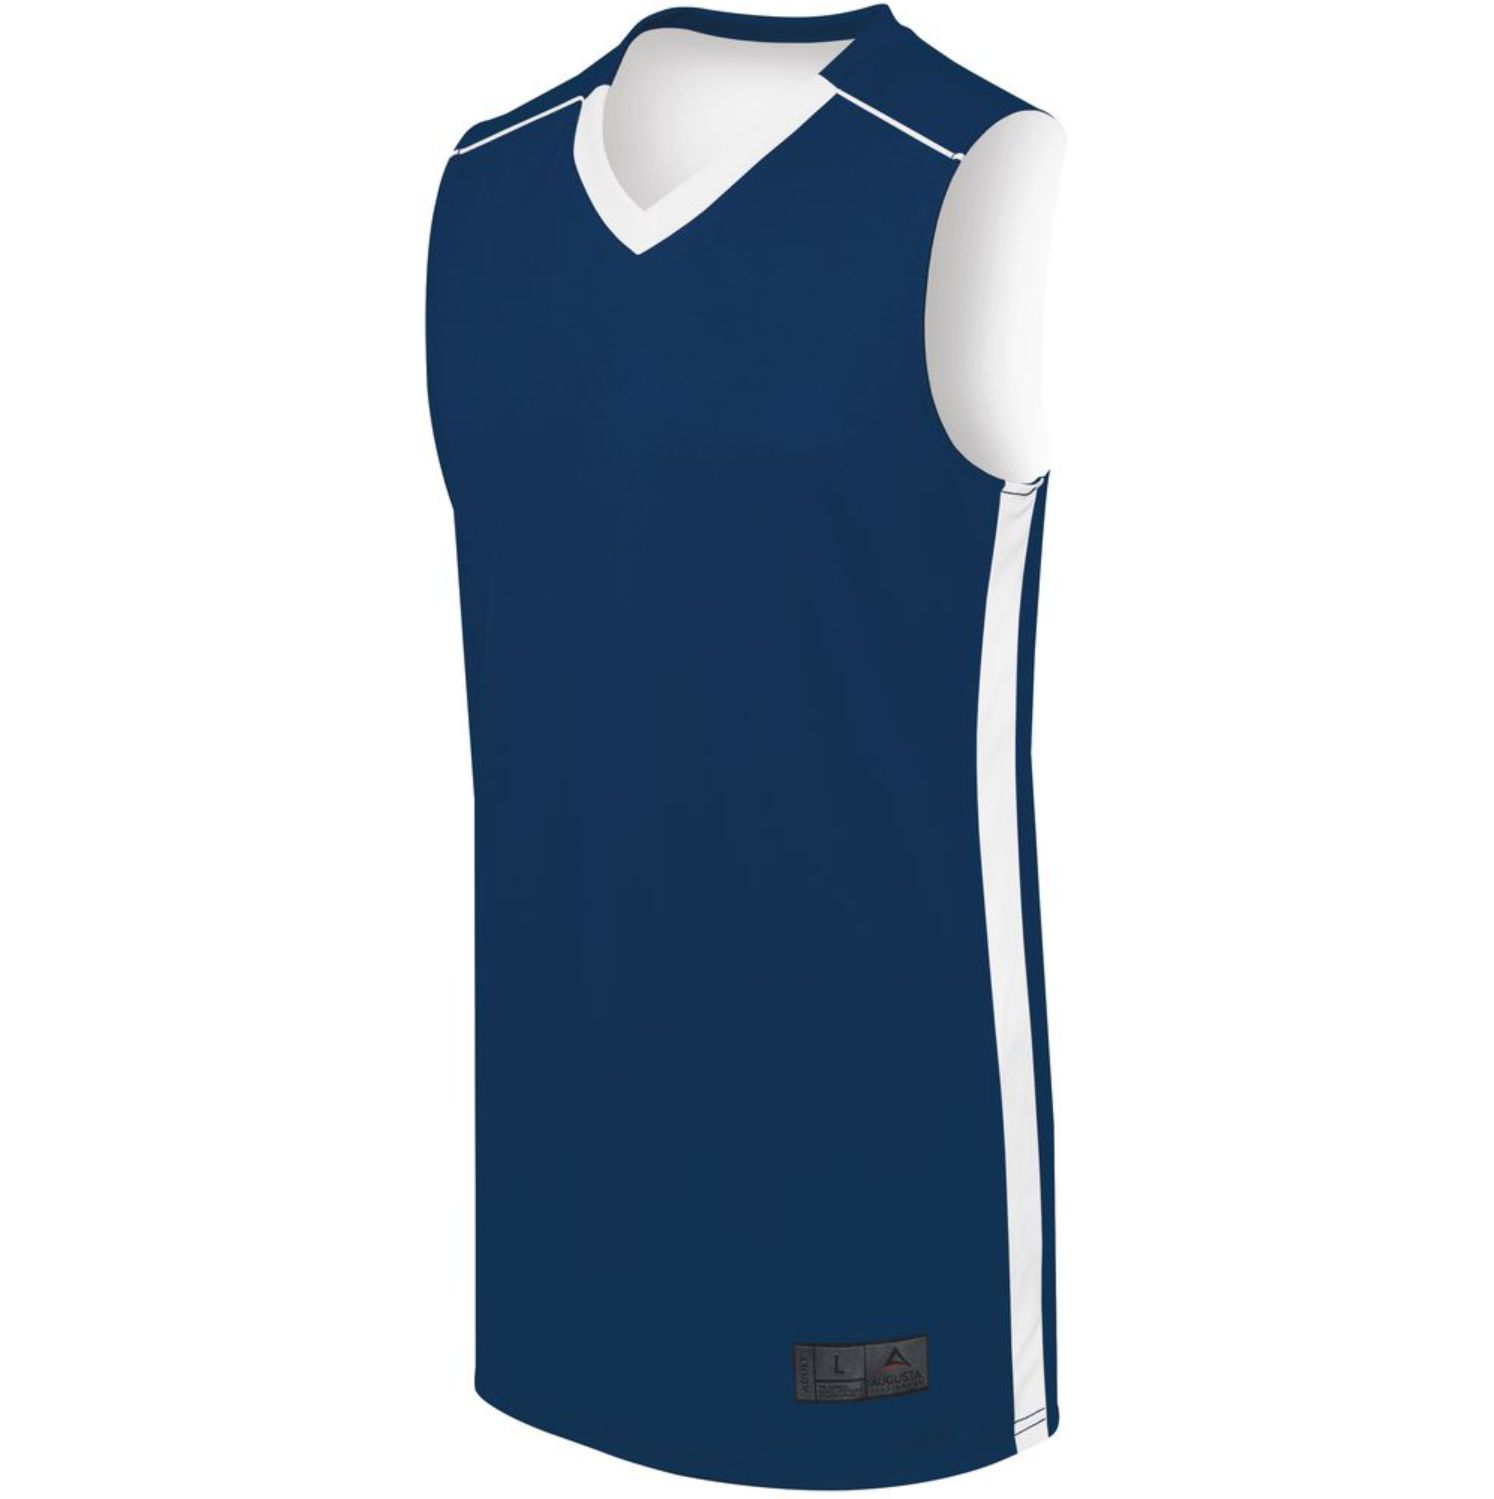 Augusta Sportswear Adult Competition Reversible Jersey #332400 Navy / White